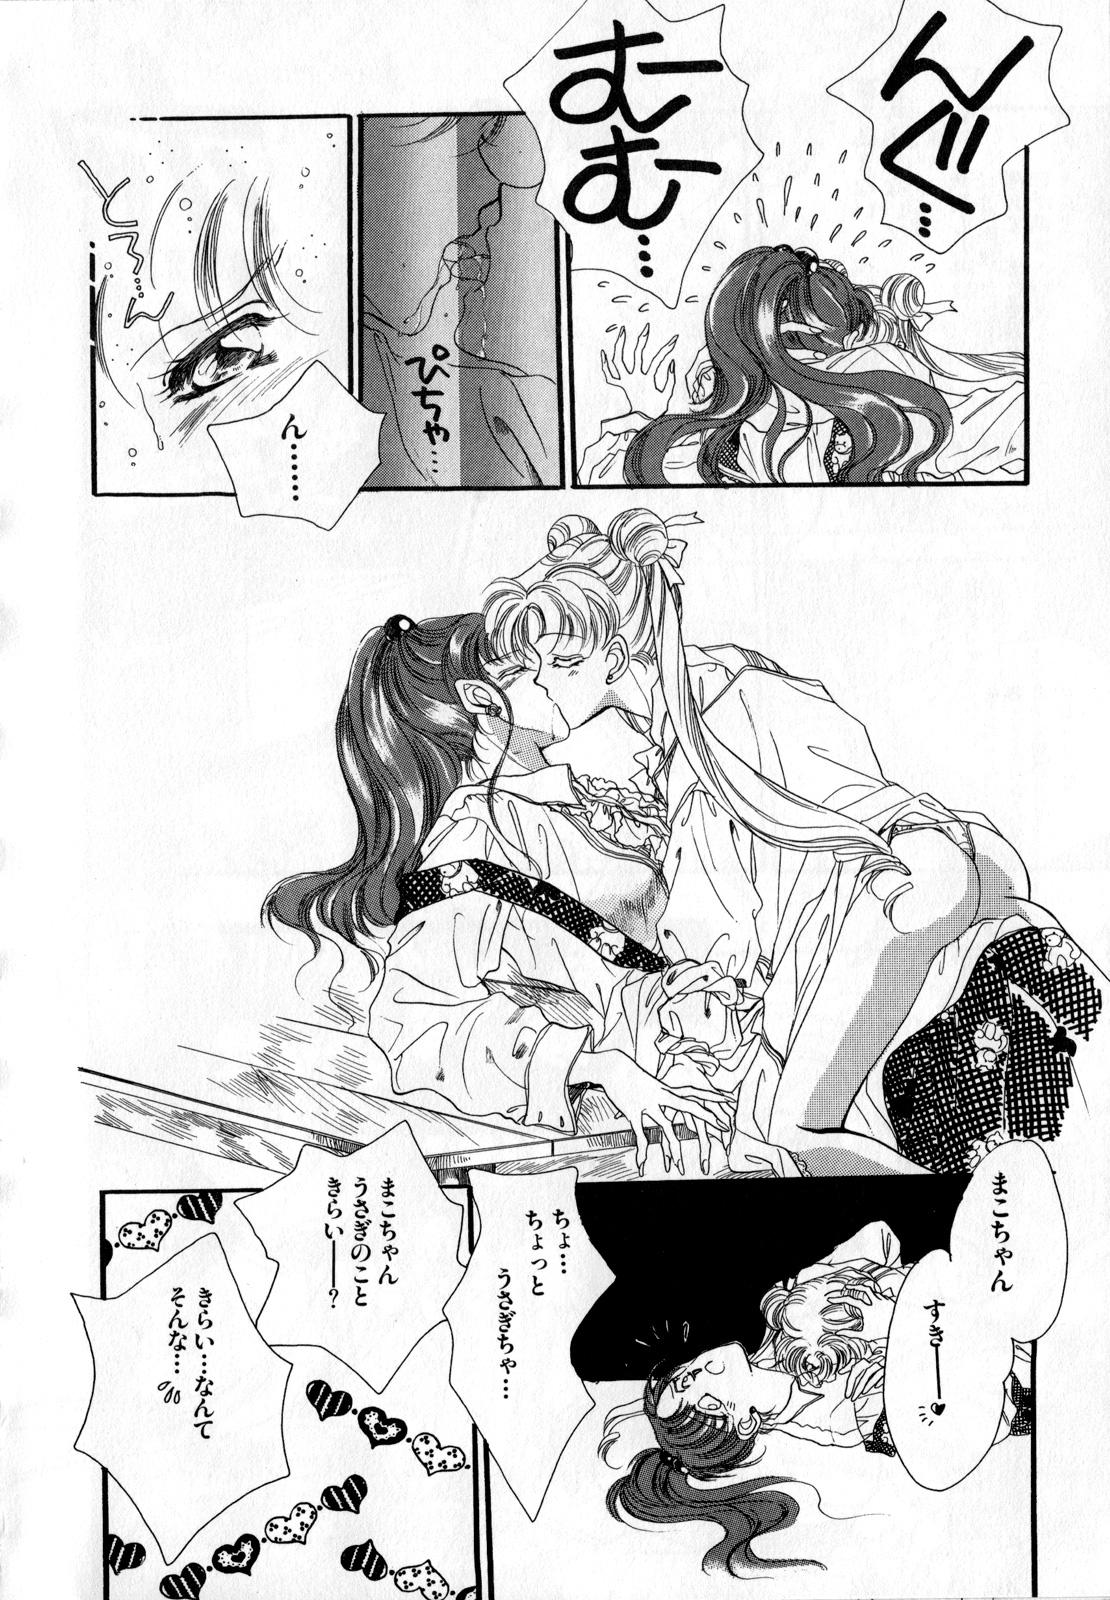 Ball Sucking Lunatic Party 2 - Sailor moon Body Massage - Page 7